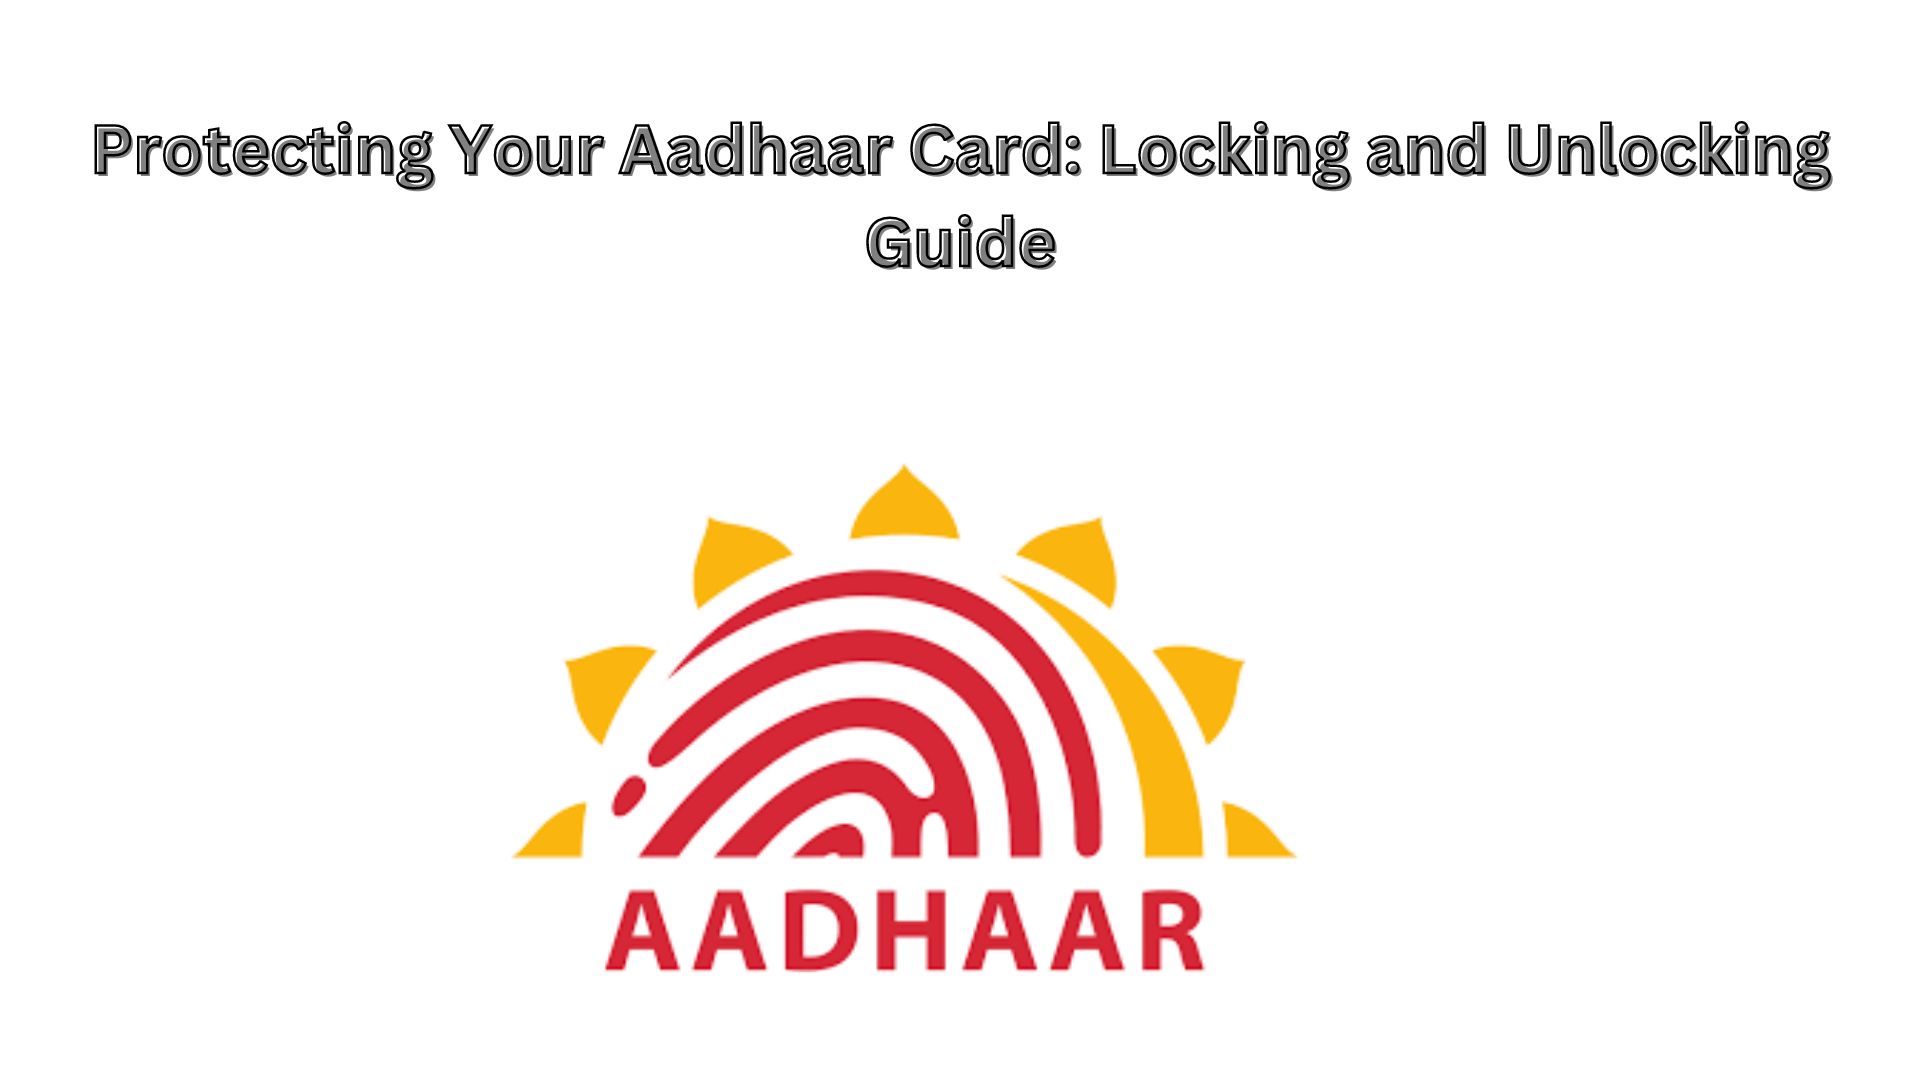 Protecting Your Aadhaar Card: Locking and Unlocking Guide